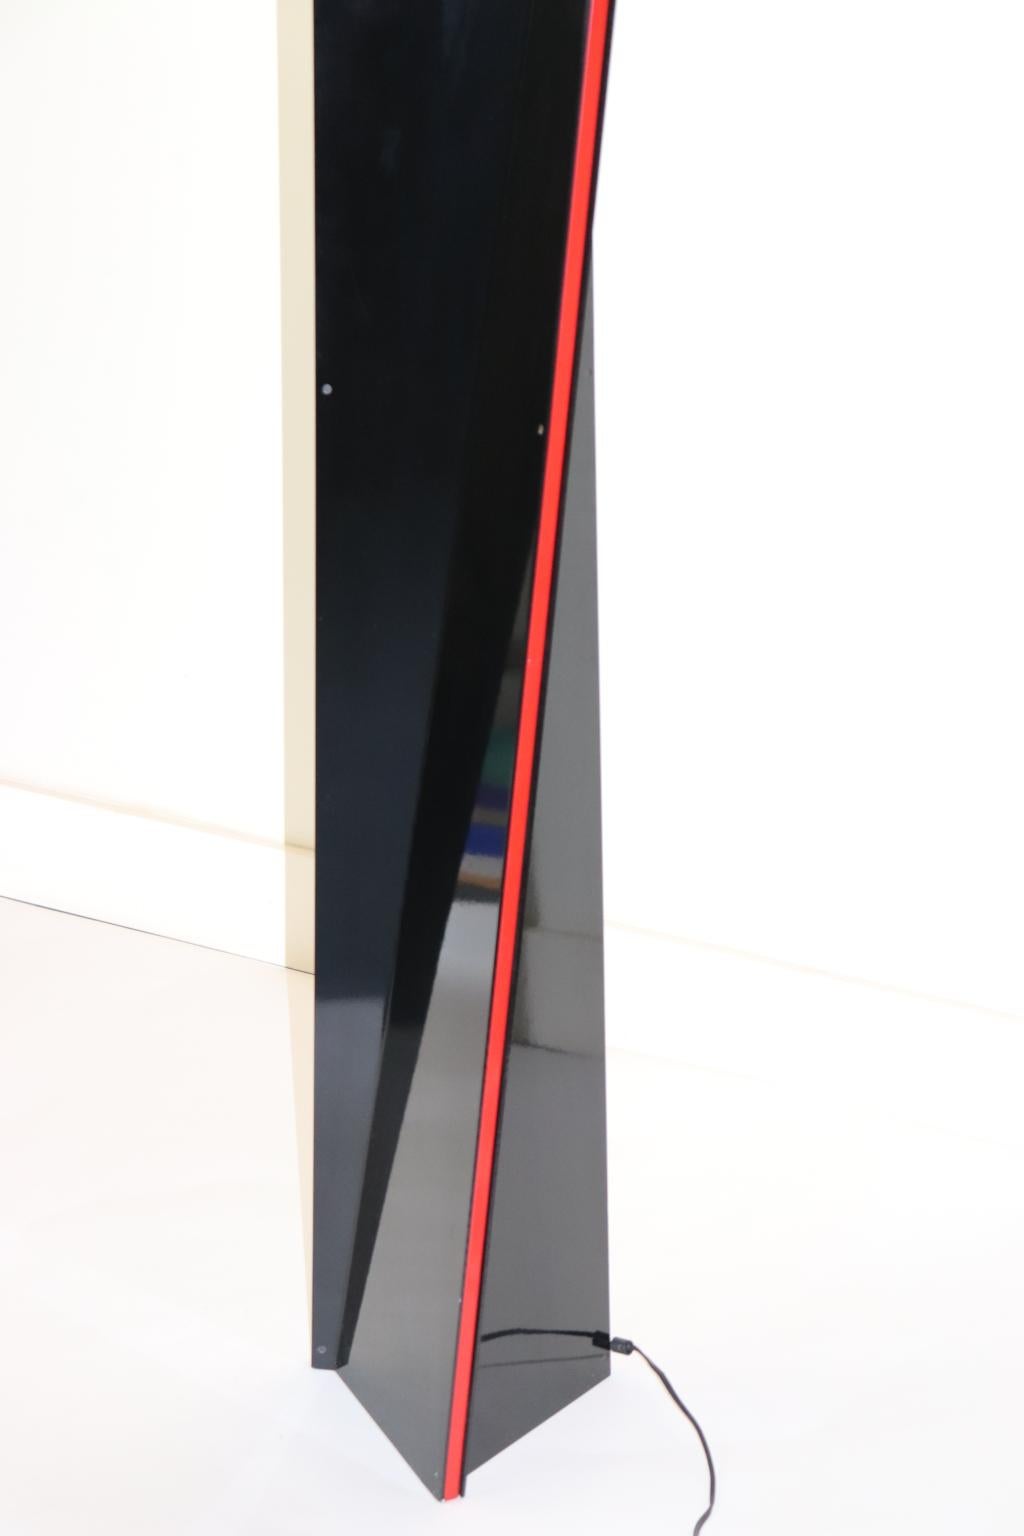 Mauro Marzollo Sculptured Floor Lamp Black with Red Stripes Details For Sale 2